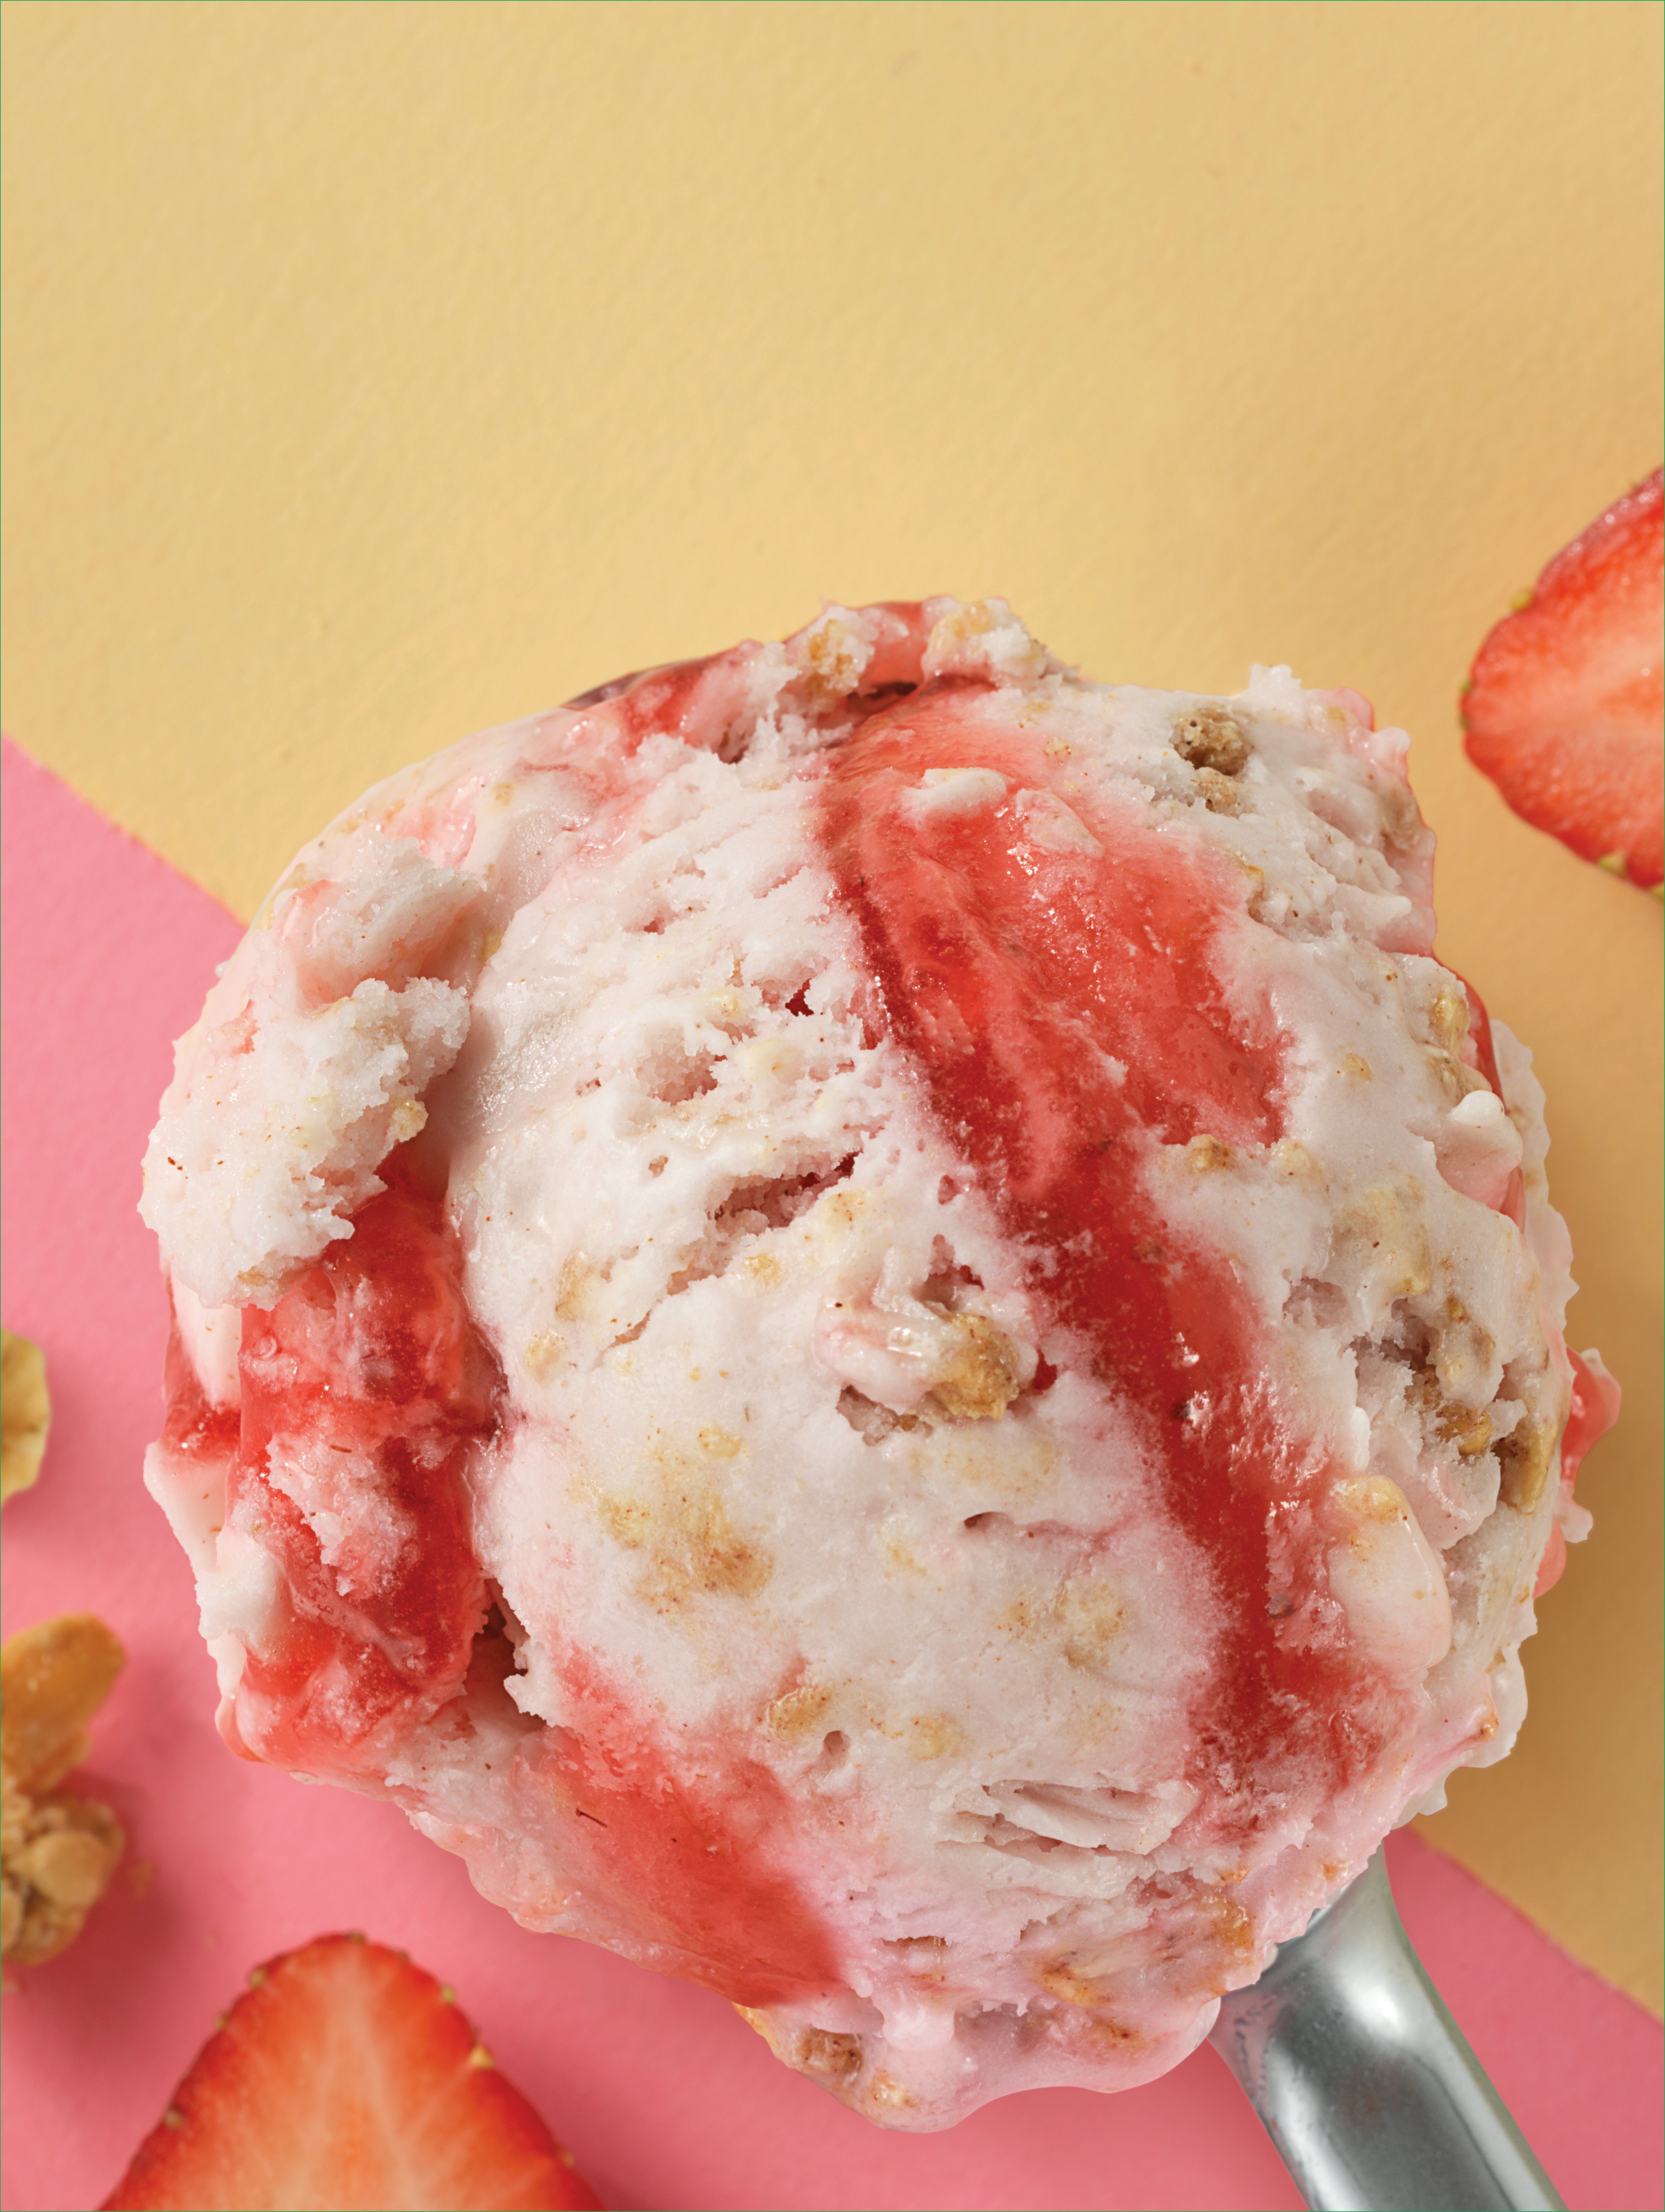 Baskin Robbins May 2021 Flavor Non Dairy Strawberry Streusel Is An